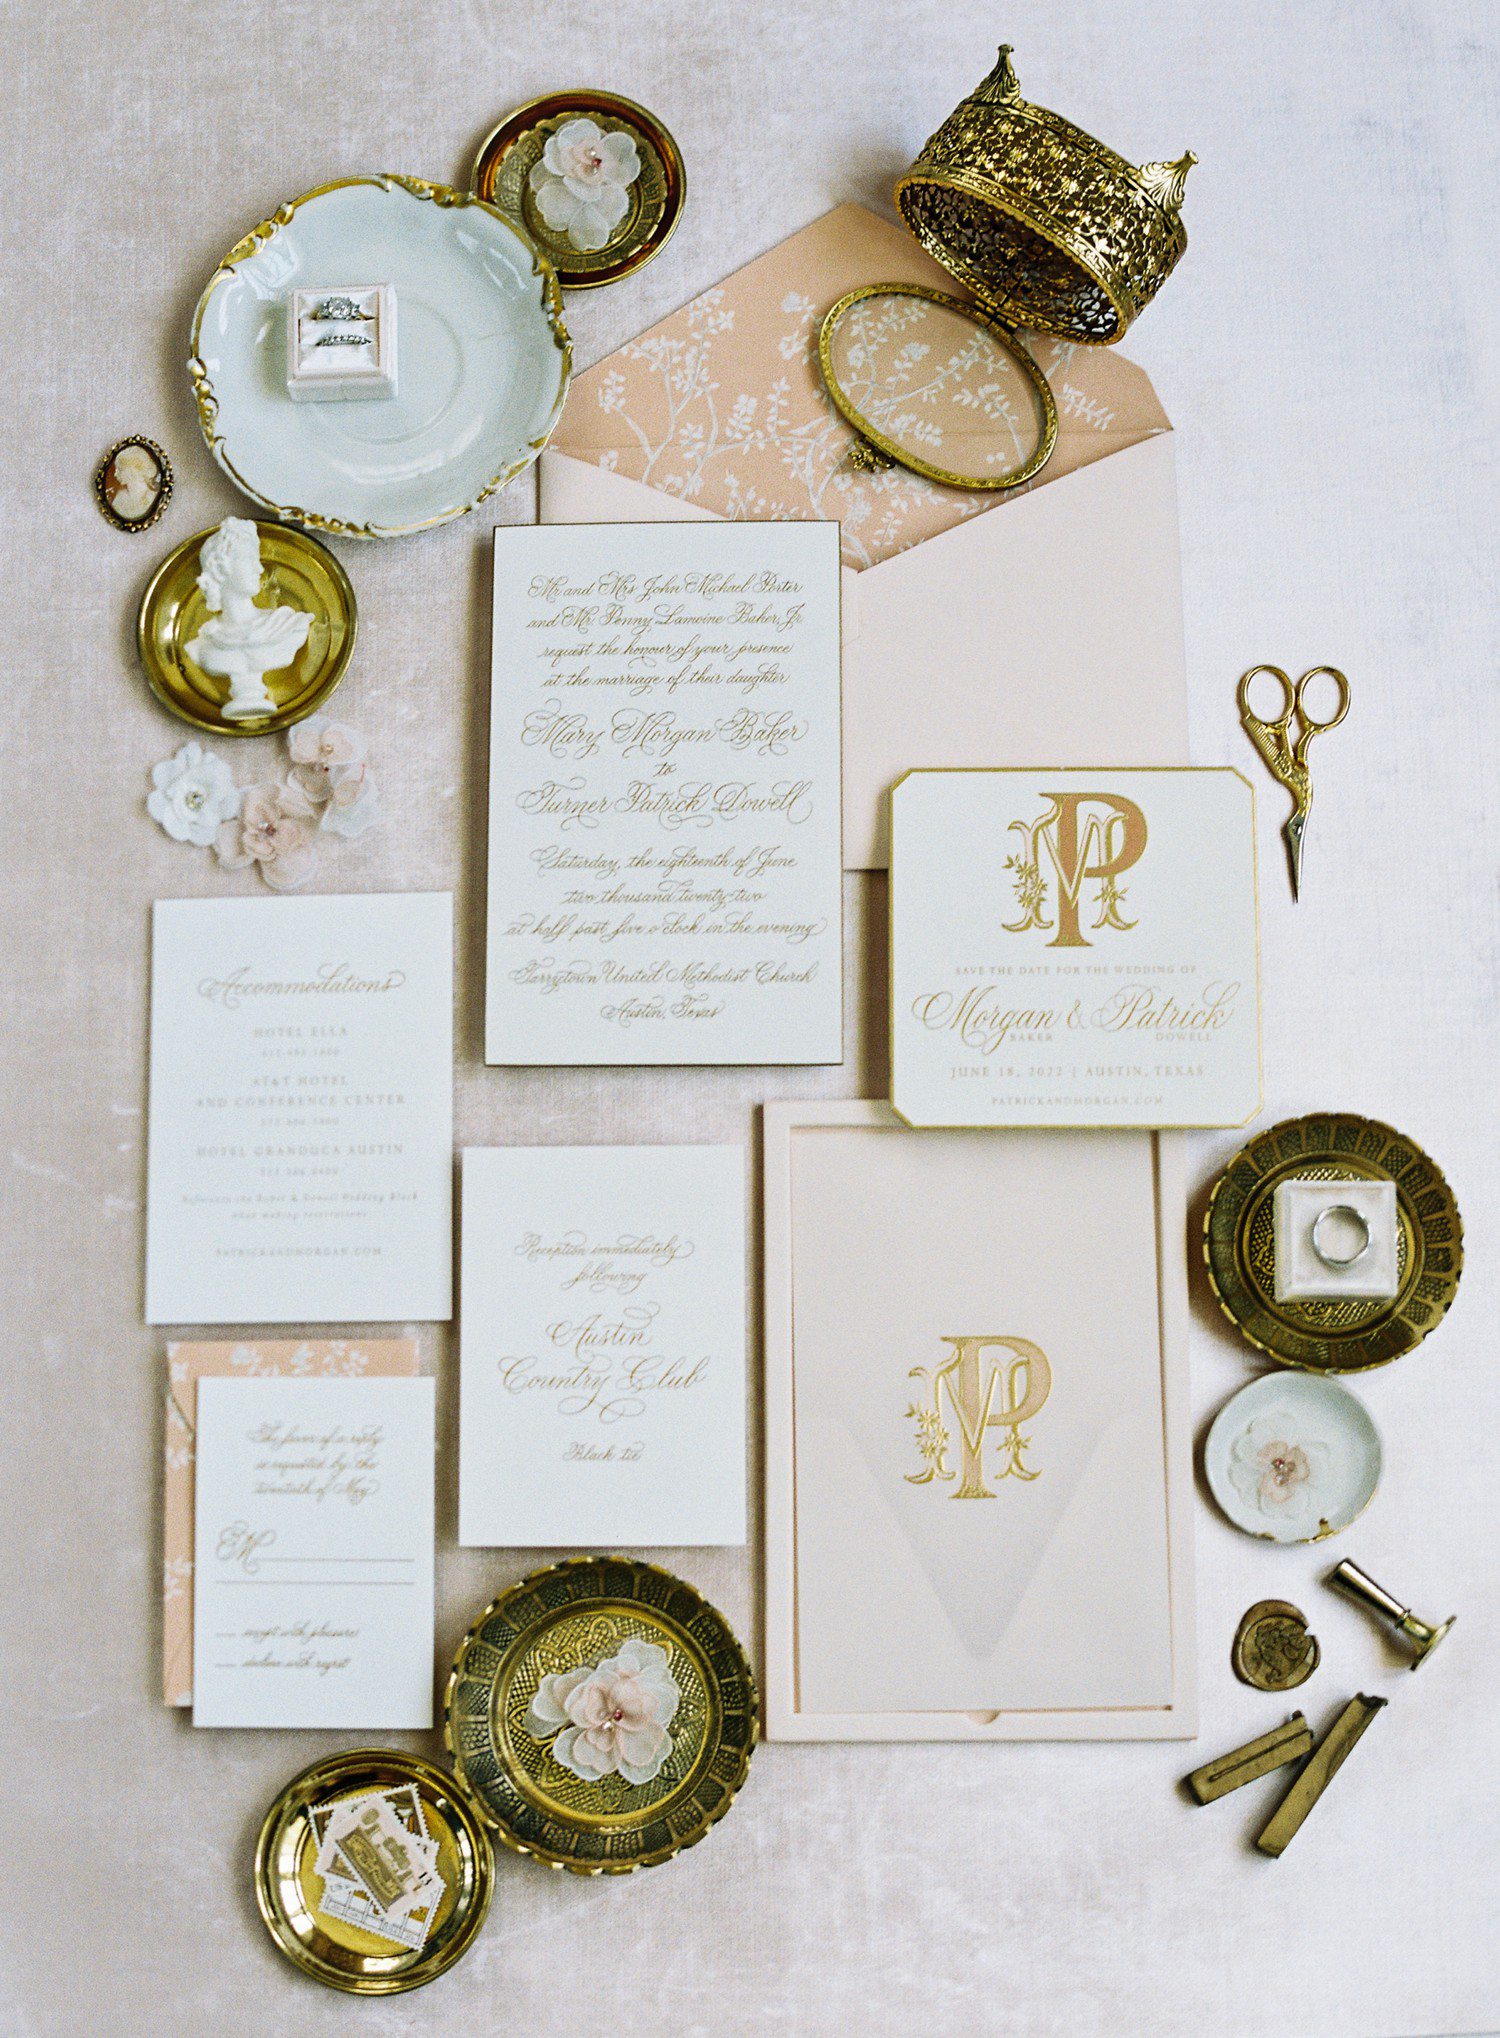 Gold and pink wedding invitation details